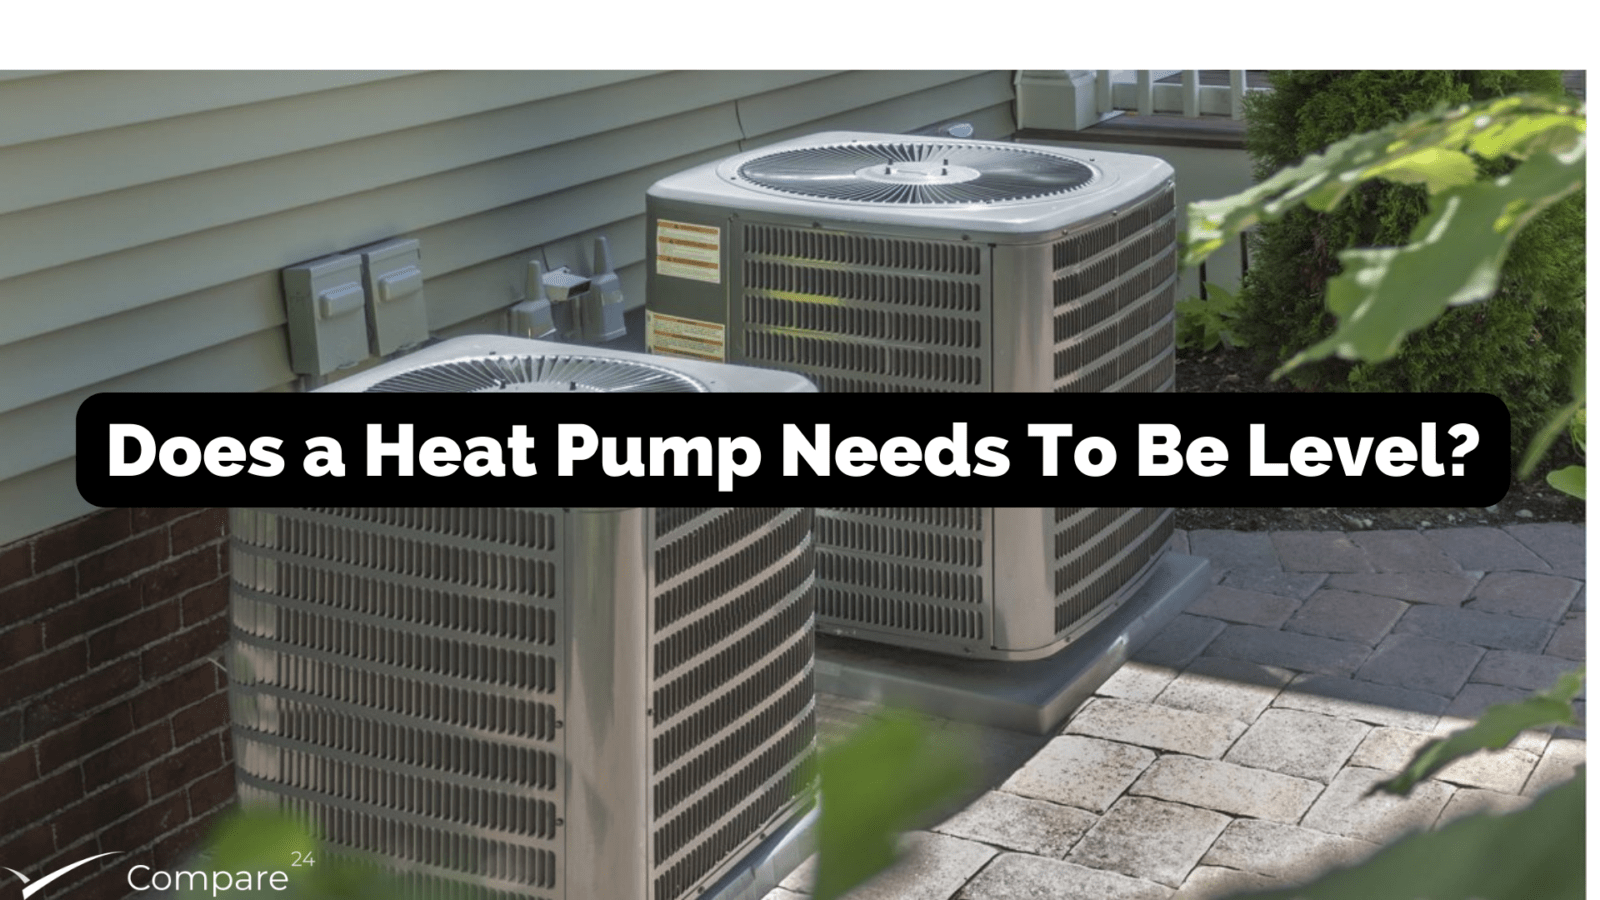 Does a Heat Pump Needs To Be Level?